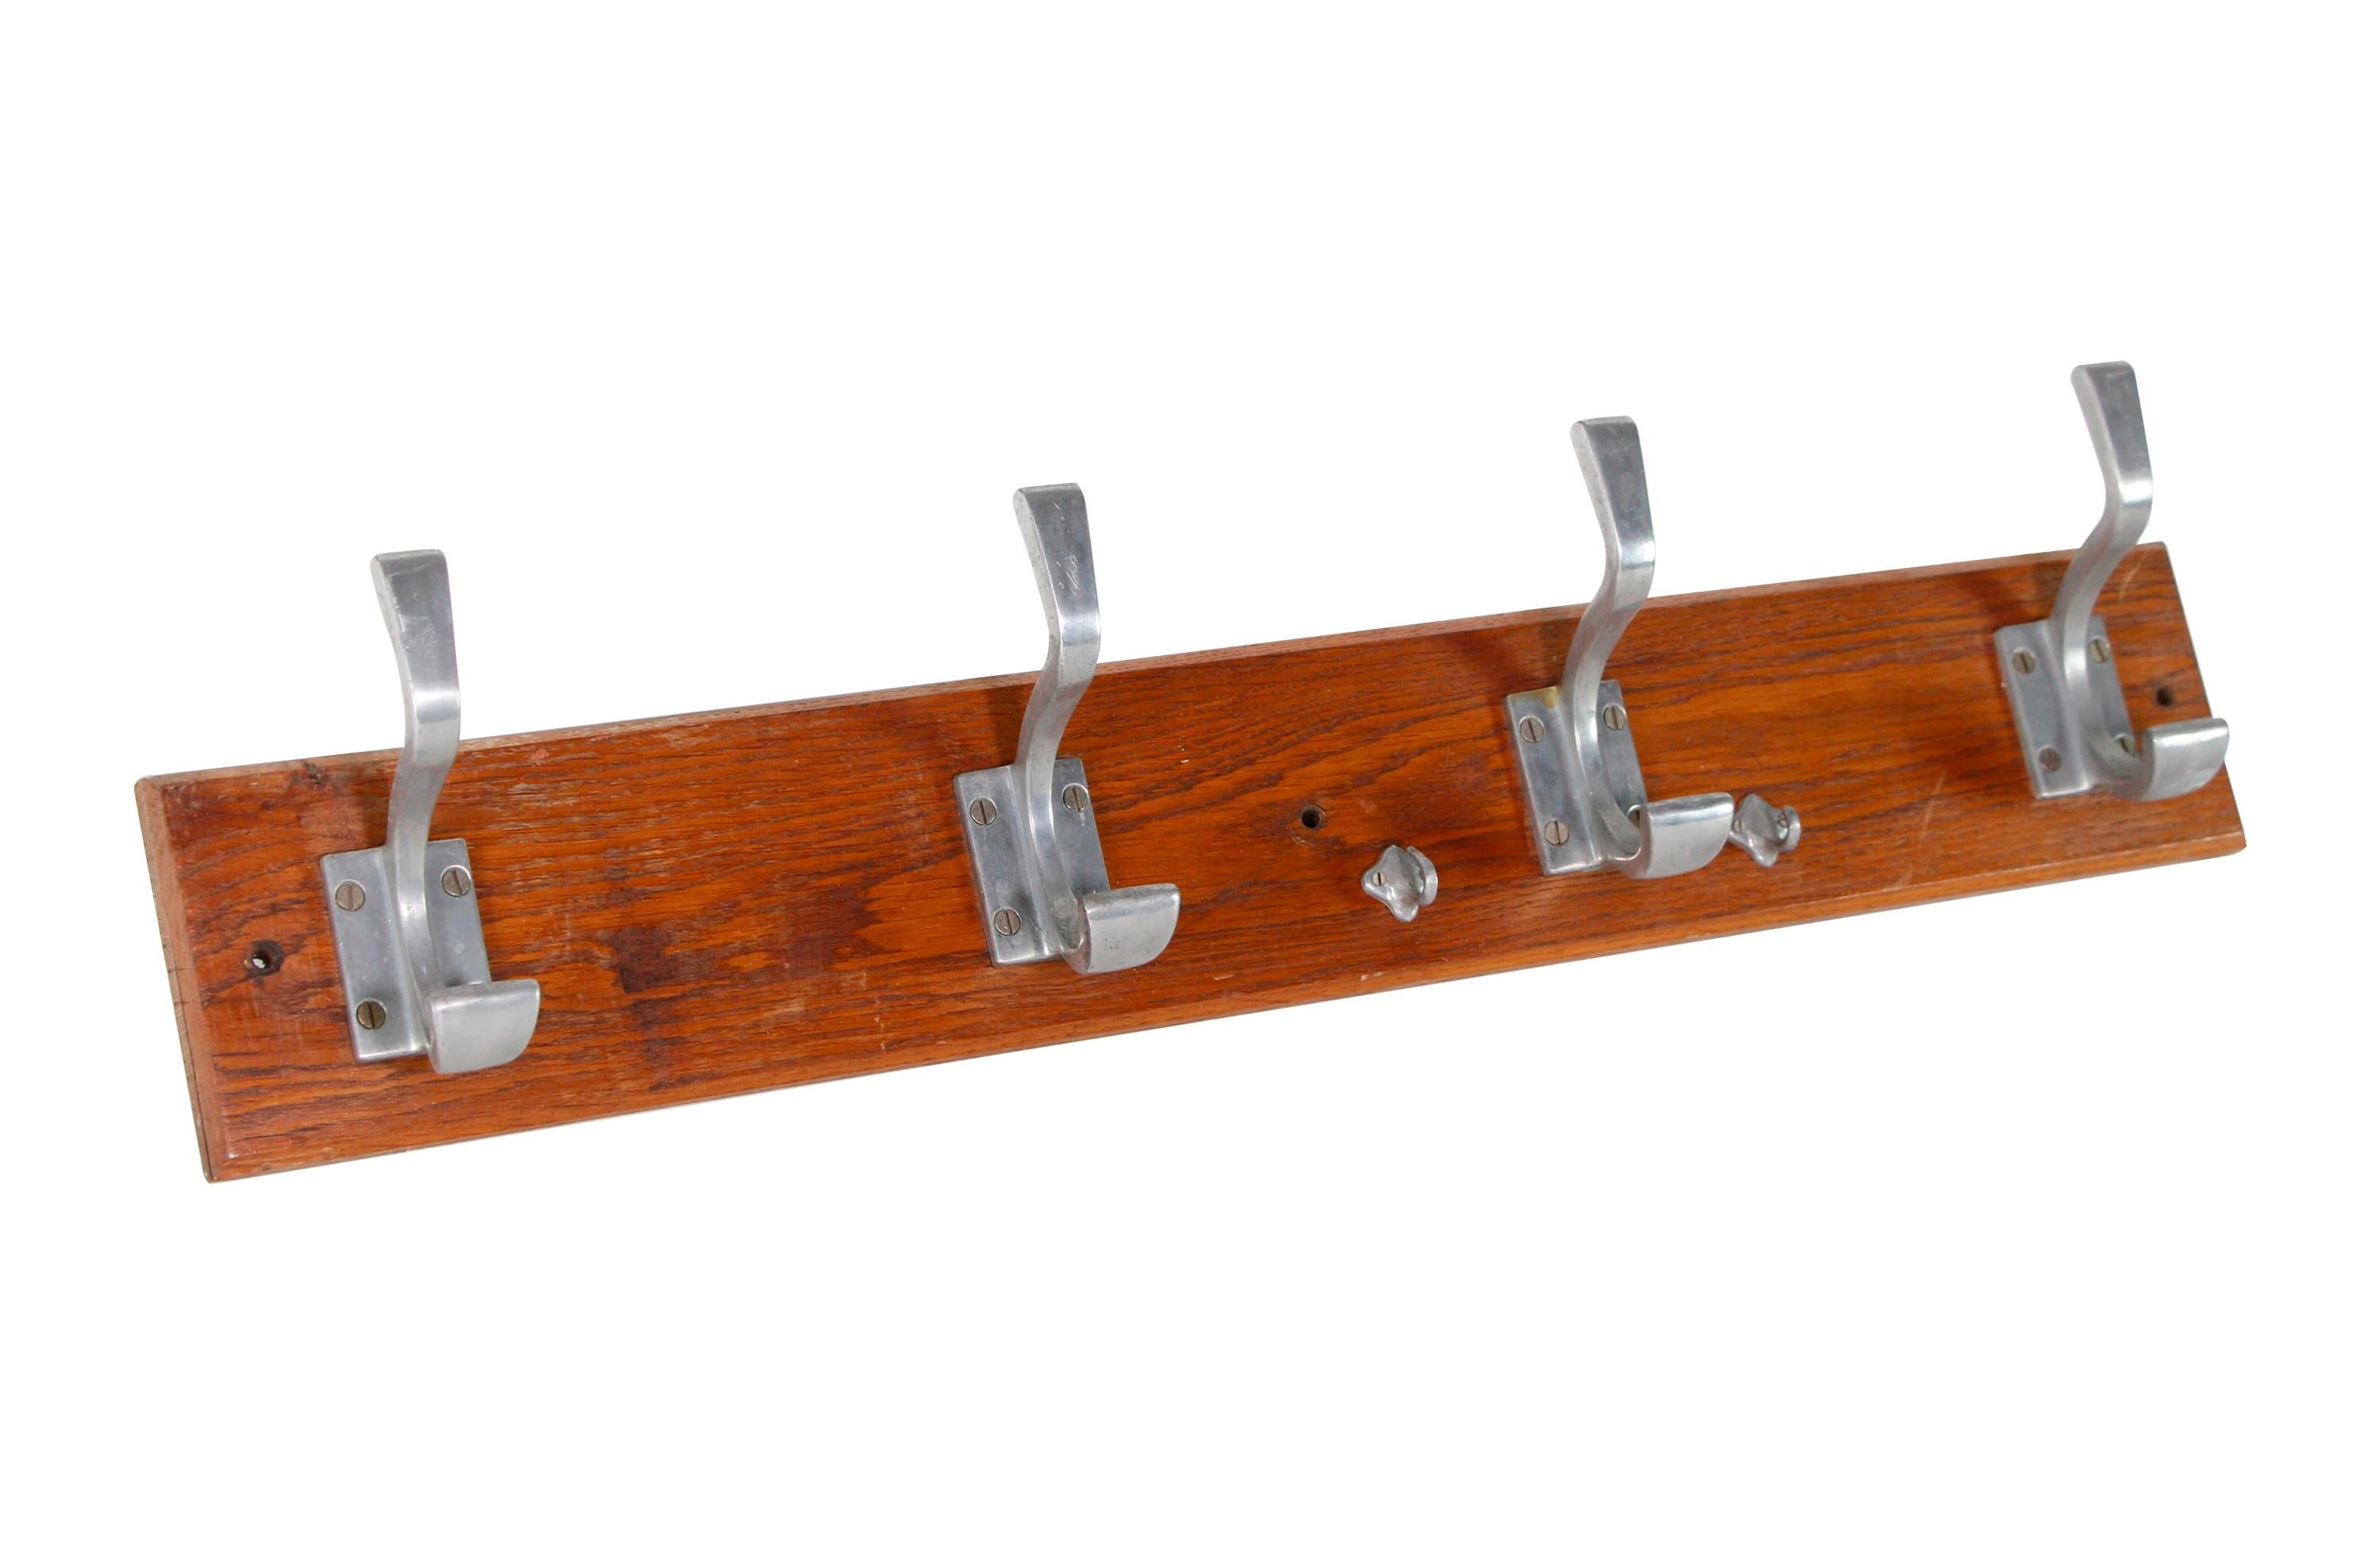 Imported from Europe, this wall mounted rack has a wood base with four large aluminum hooks and two tiny hooks centered on right side. This can be seen at our 400 Gilligan St location in Scranton, PA.